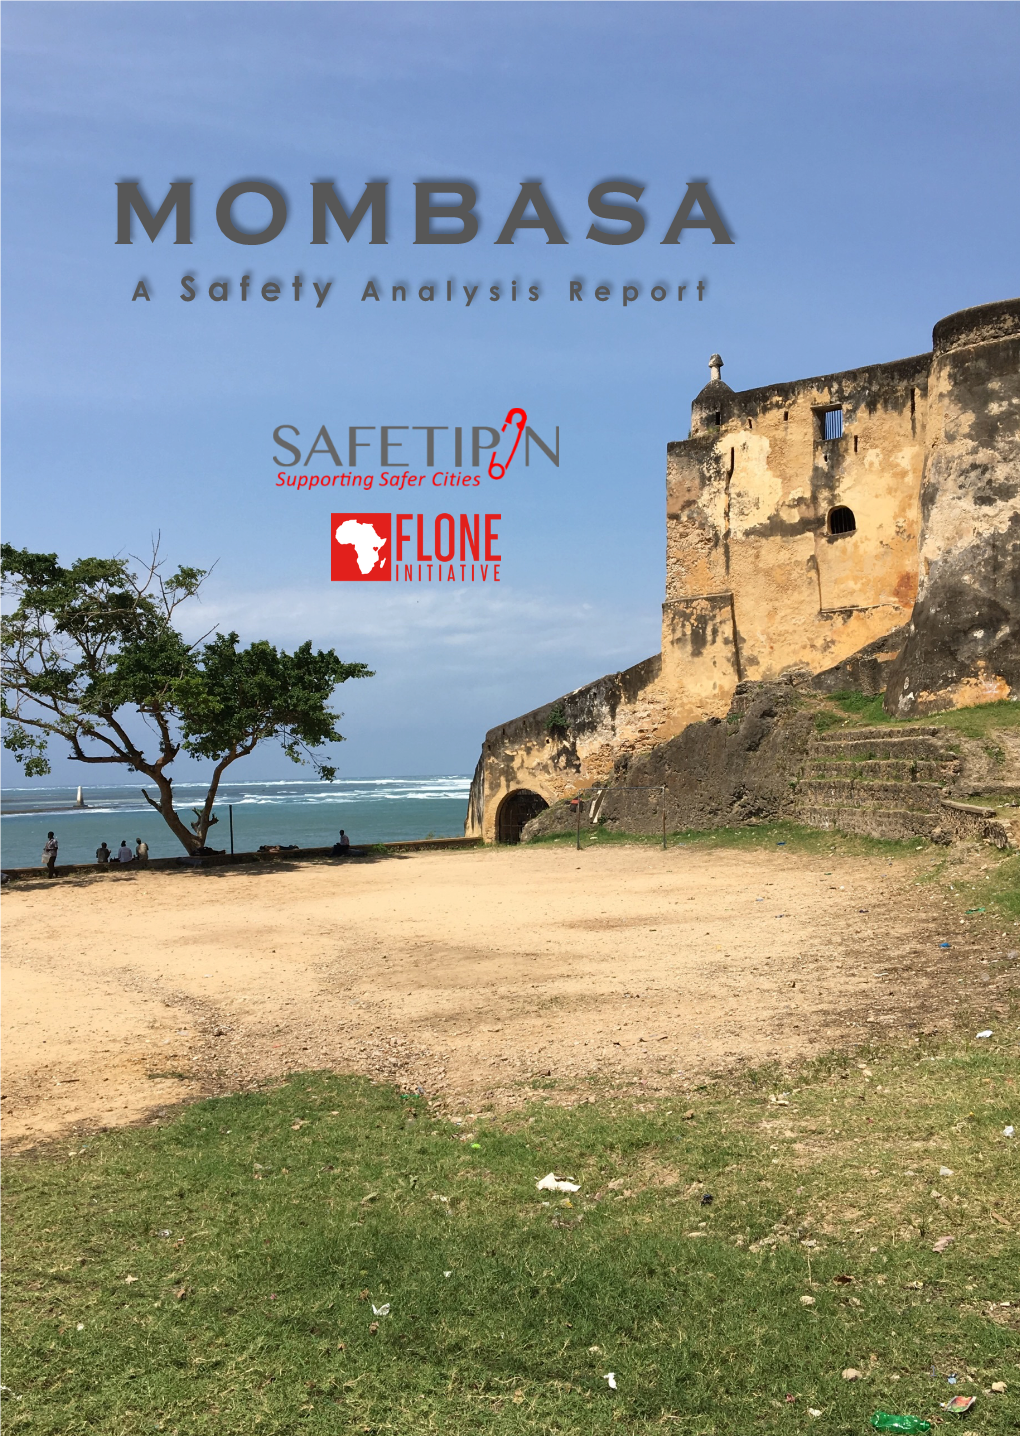 MOMBASA a Safety Analysis Report